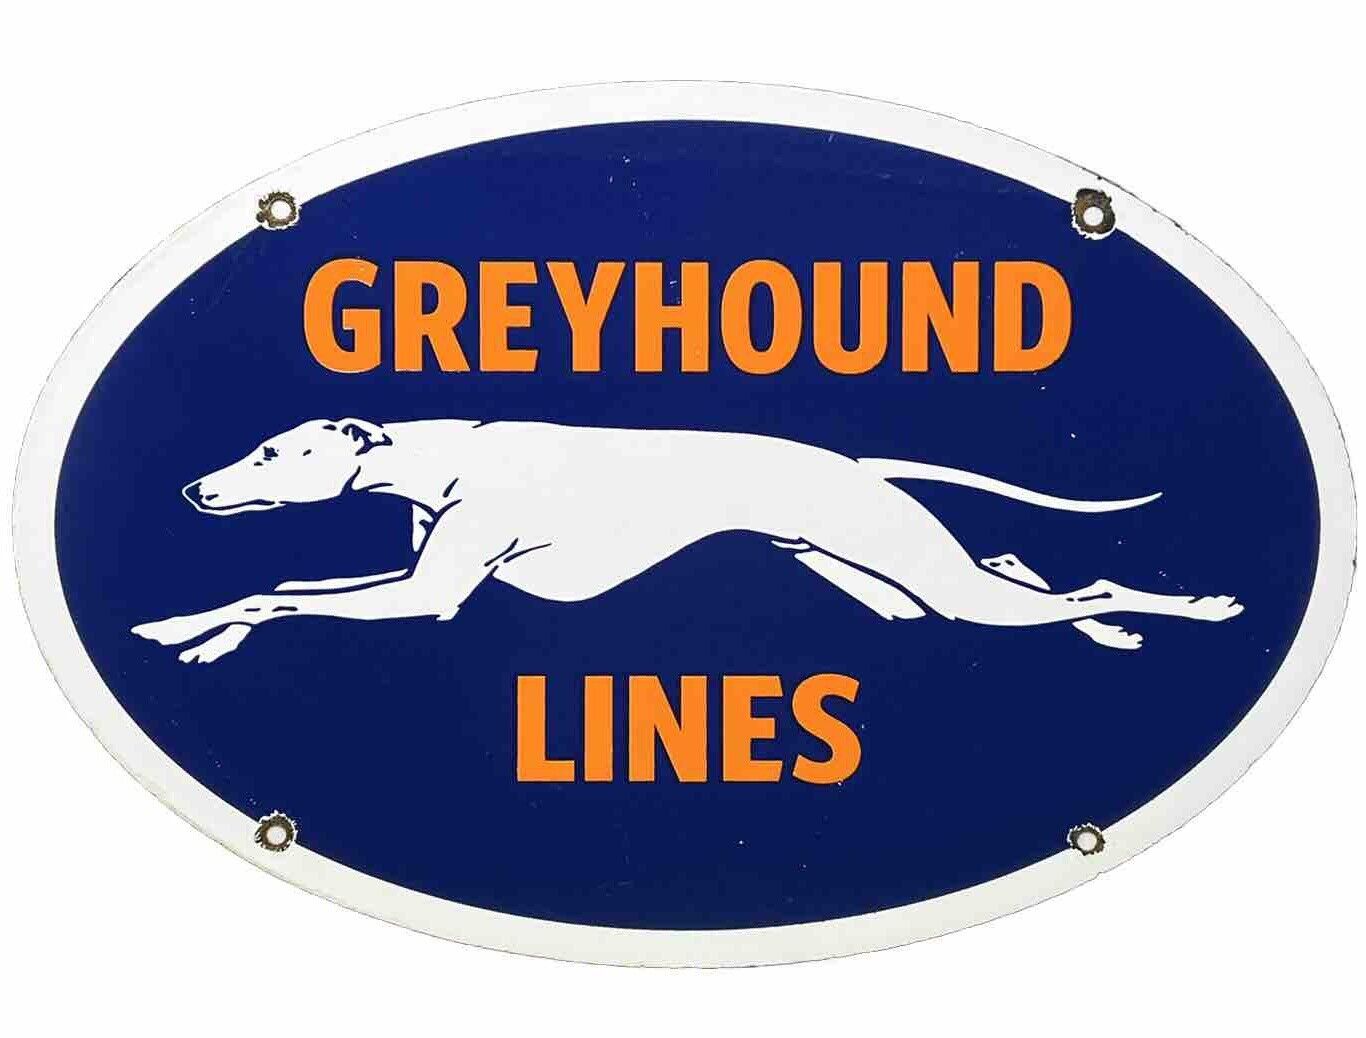 VINTAGE GREYHOUND BUS LINE PORCELAIN SIGN GAS OIL DEPOT STOP YELLOWAY DOG AUTO